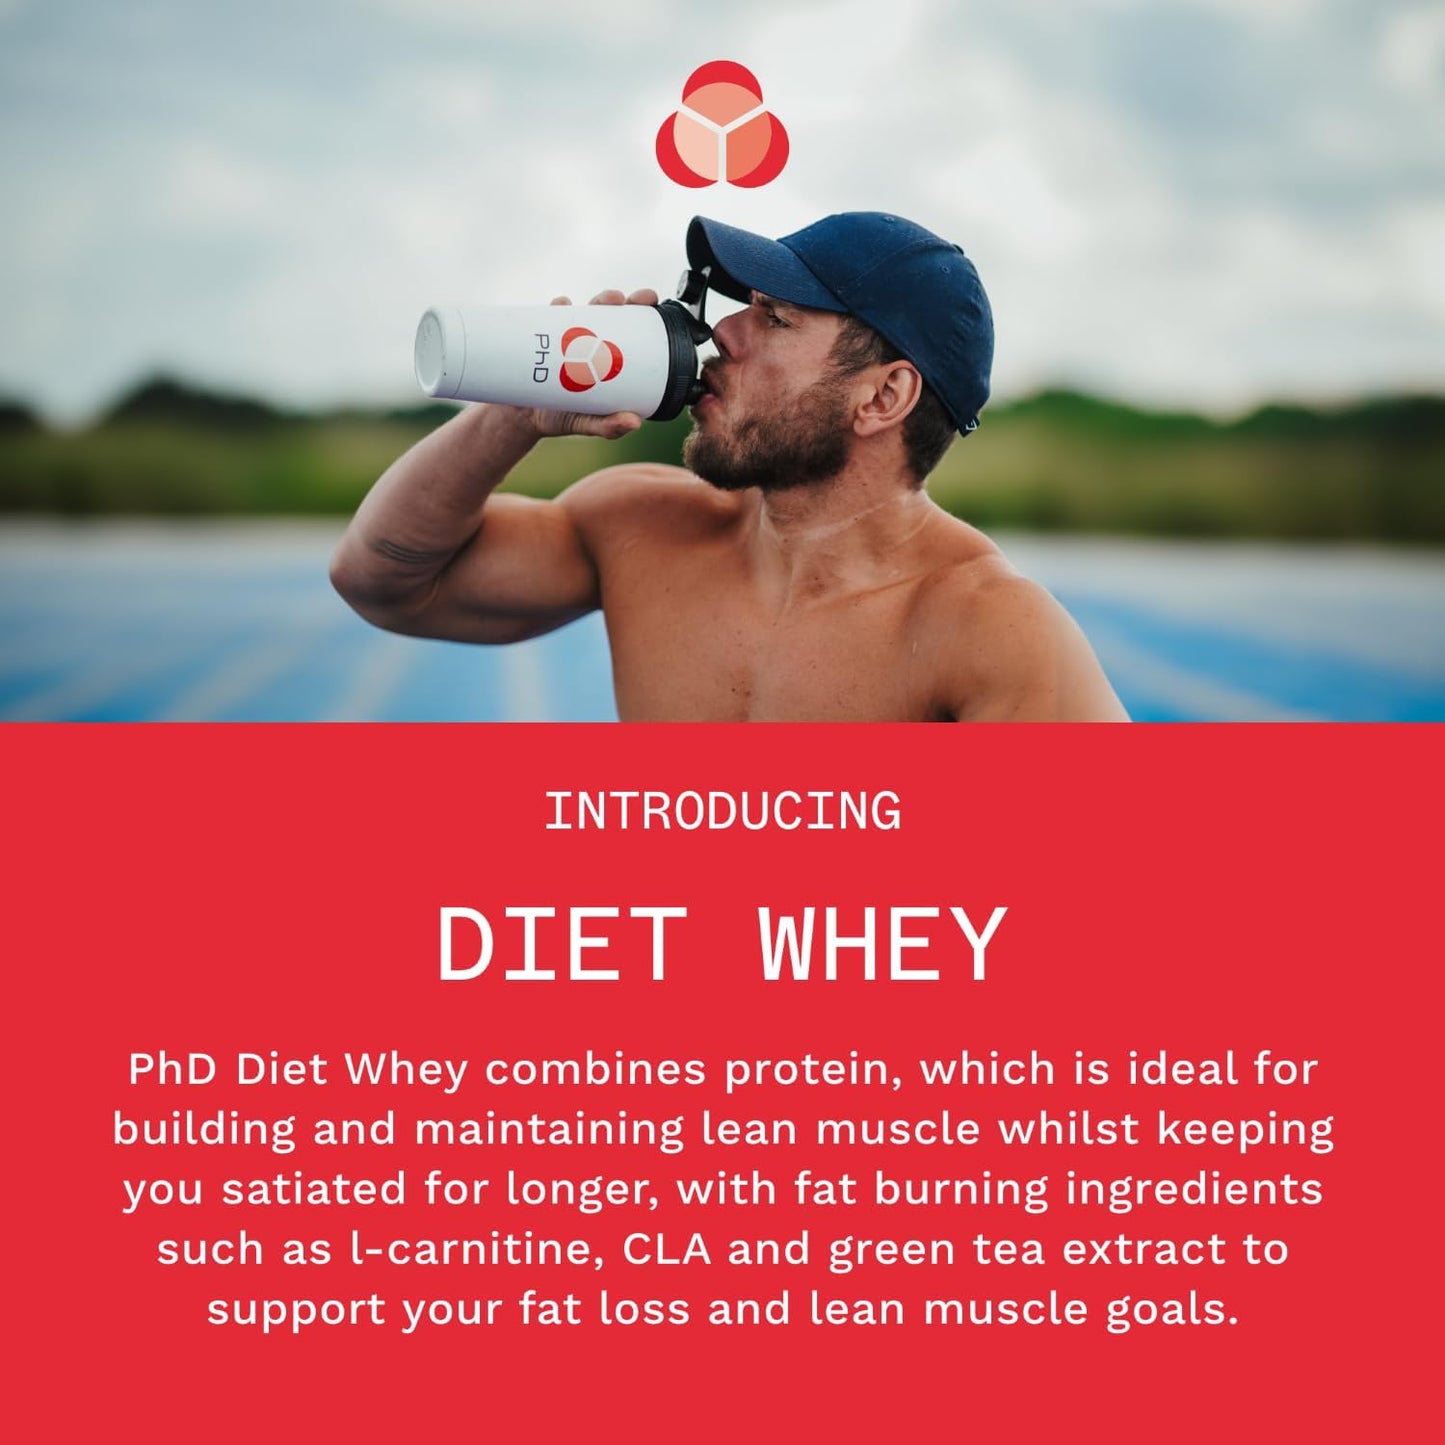 Nutrition Diet Whey Low Calorie Protein Powder, Low Carb, High Protein Lean Matrix, Raspberry and White Chocolate Protein Powder, High Protein, 40 Servings per 1 Kg Bag